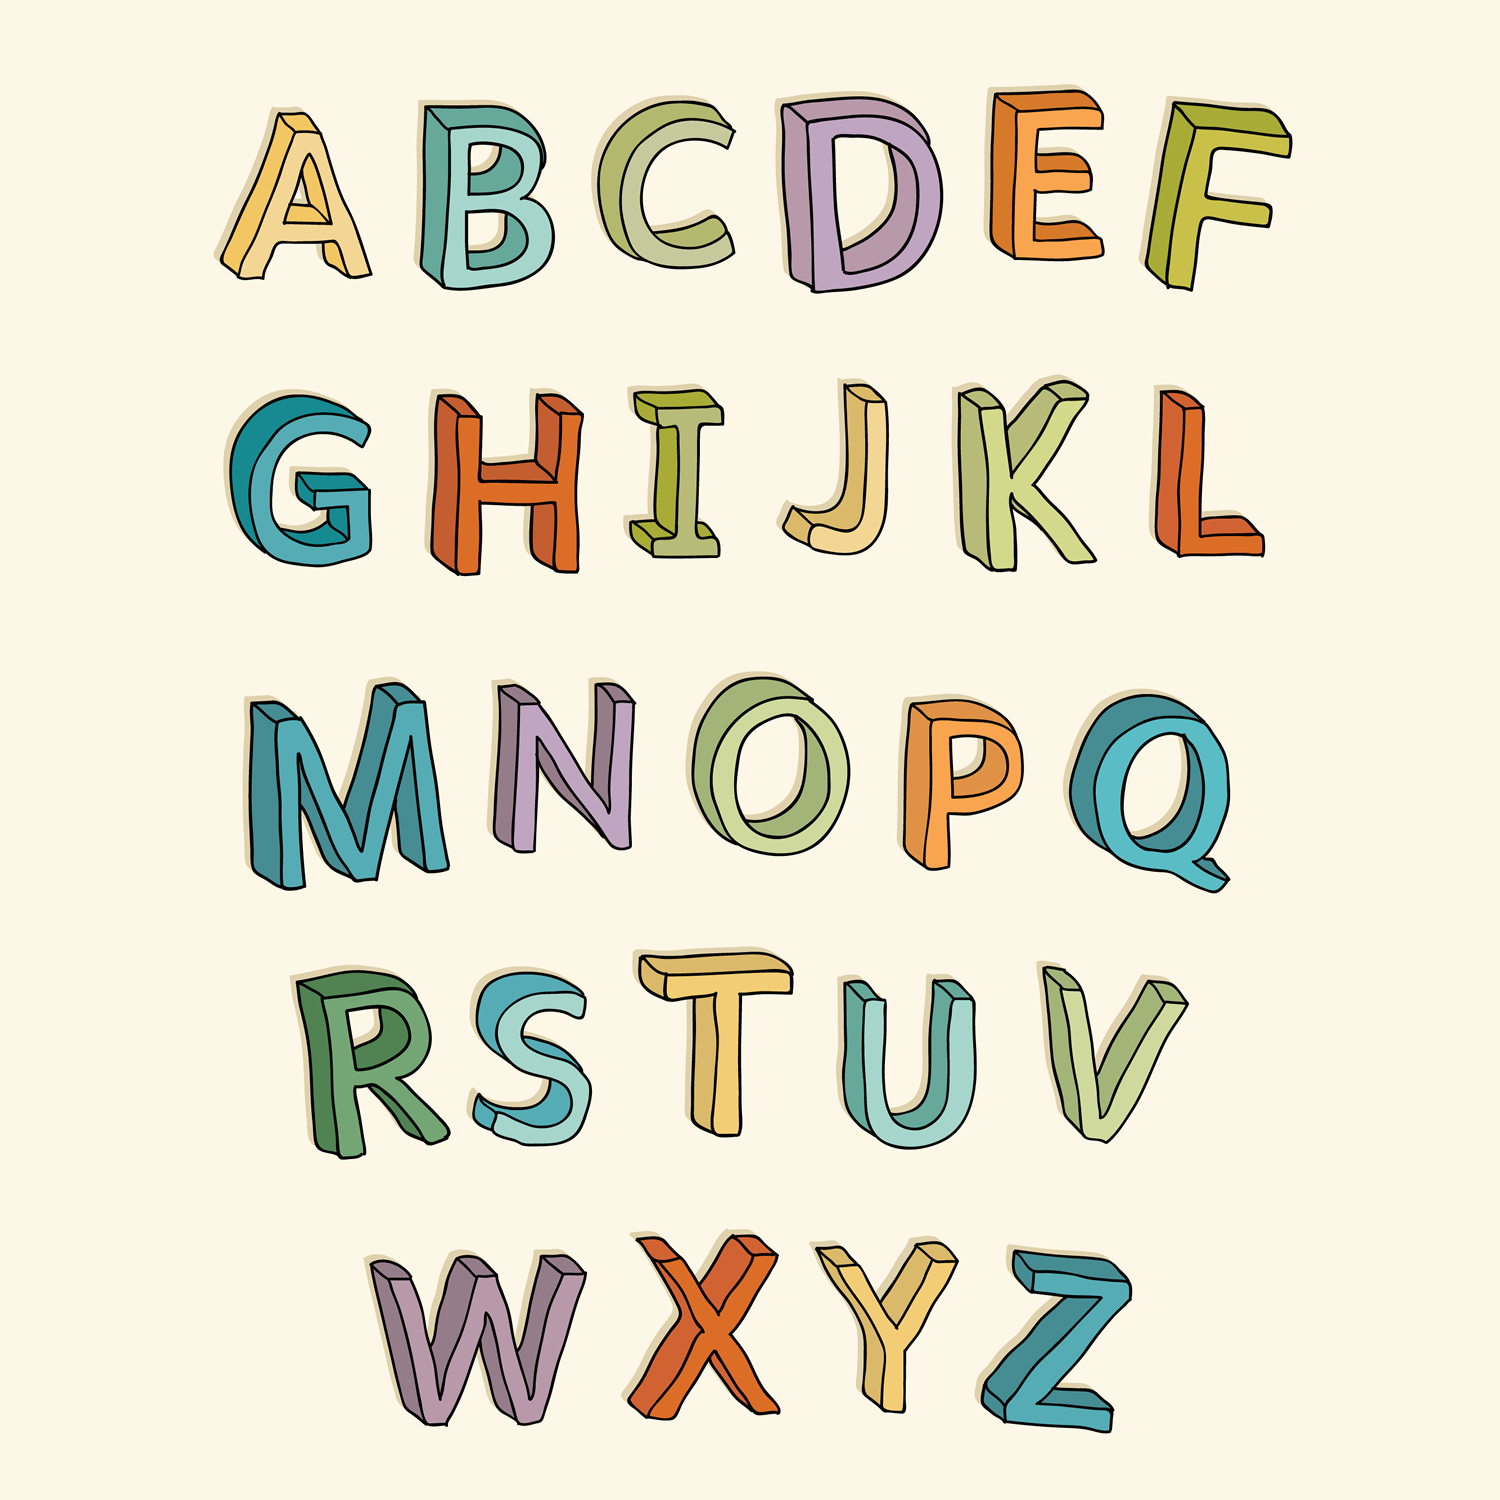 Preschool letter learning activities created by experts.